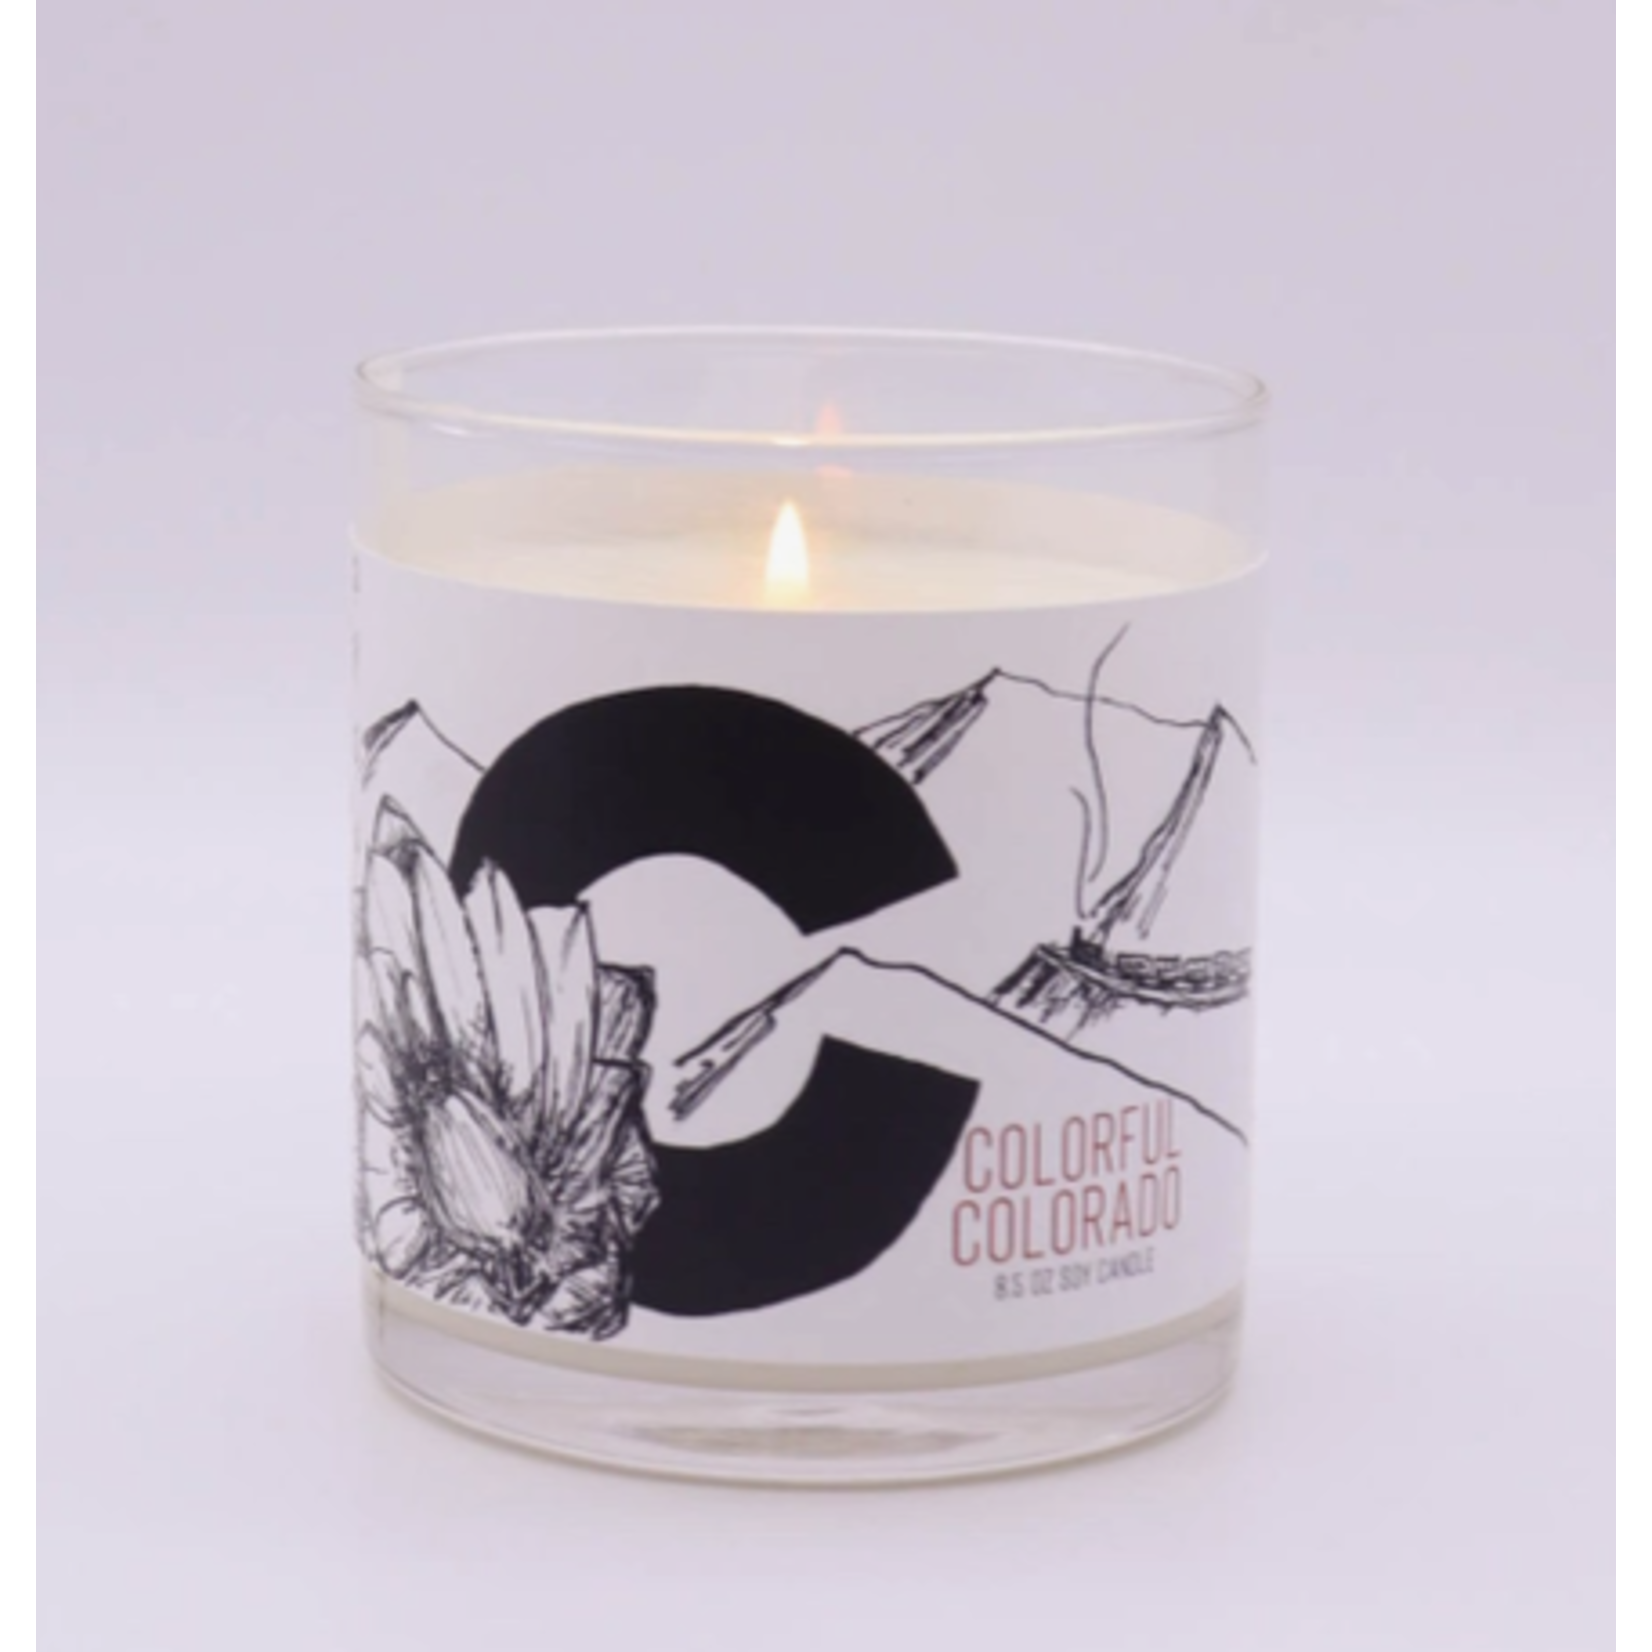 Roots & Wings Roots & Wings Colorful Colorado Soy Candle